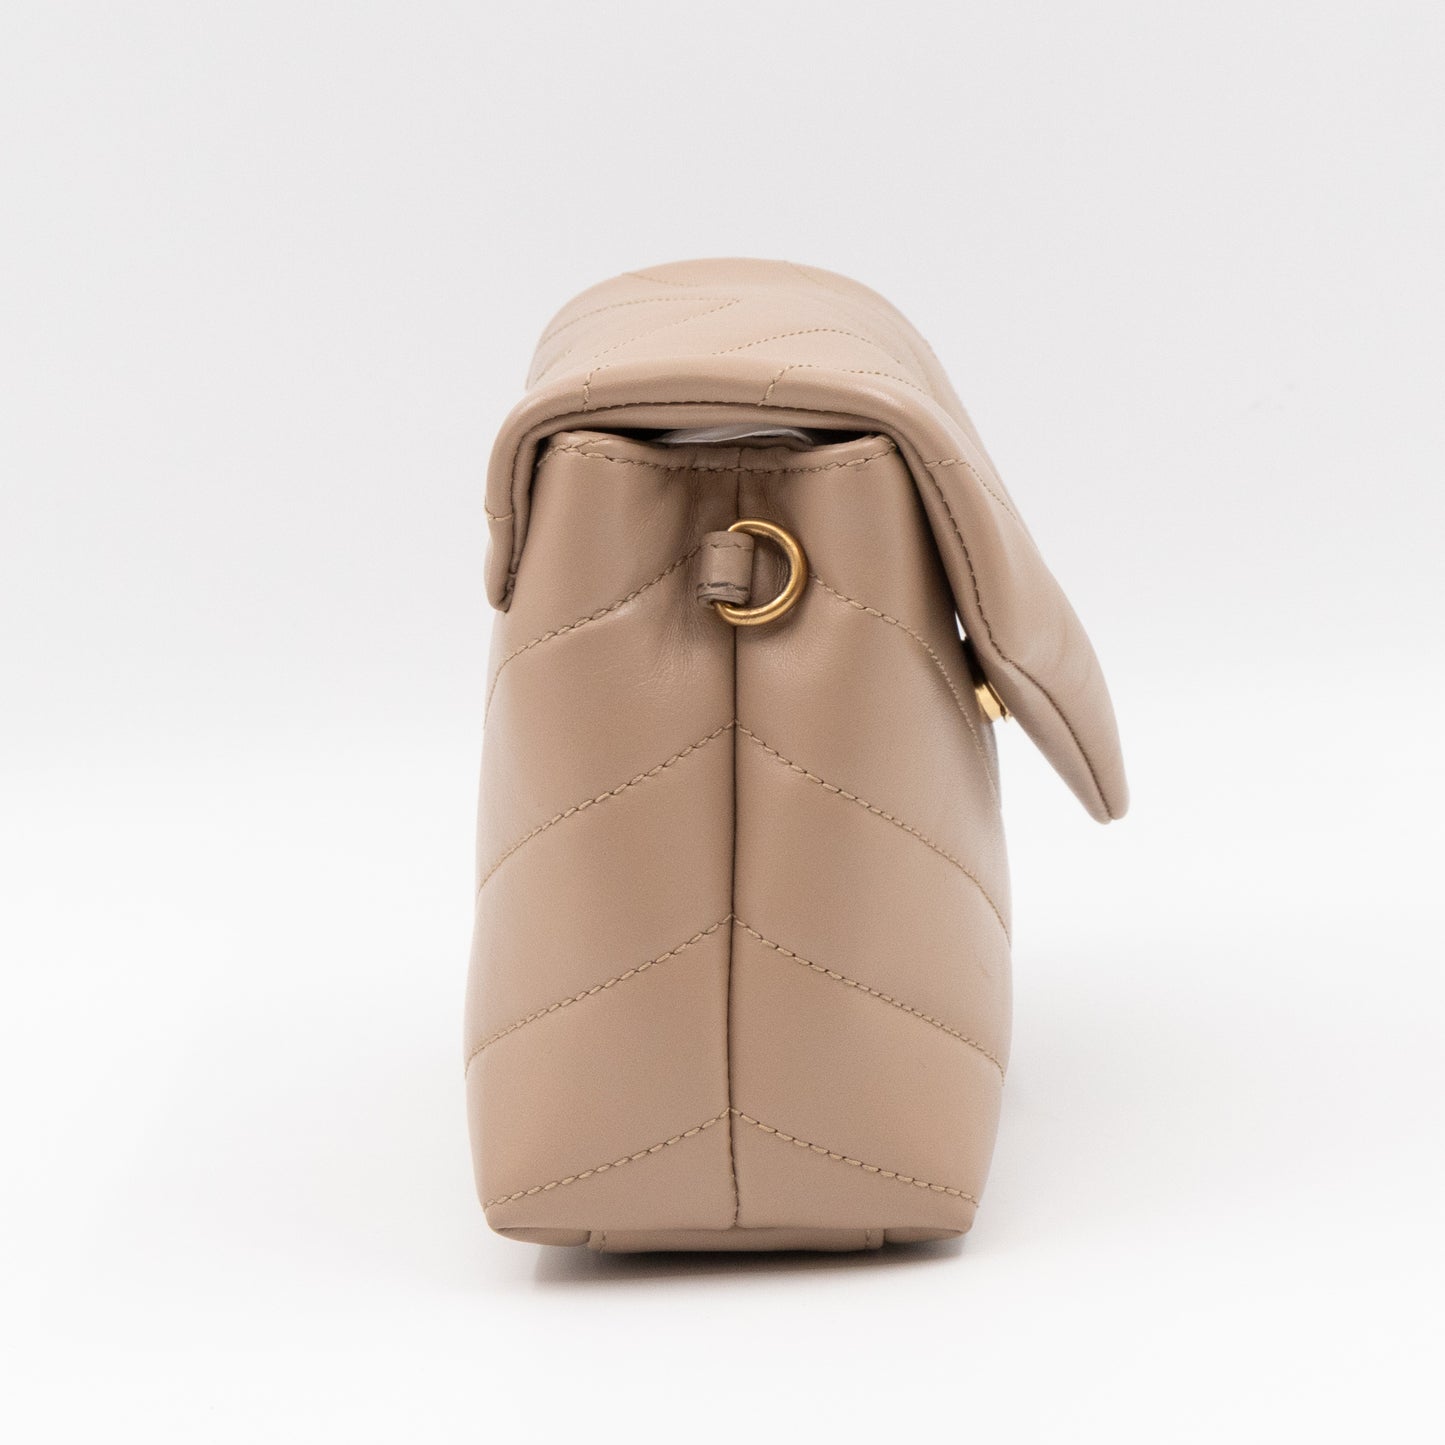 Loulou Toy Strap Bag Dark Beige Leather